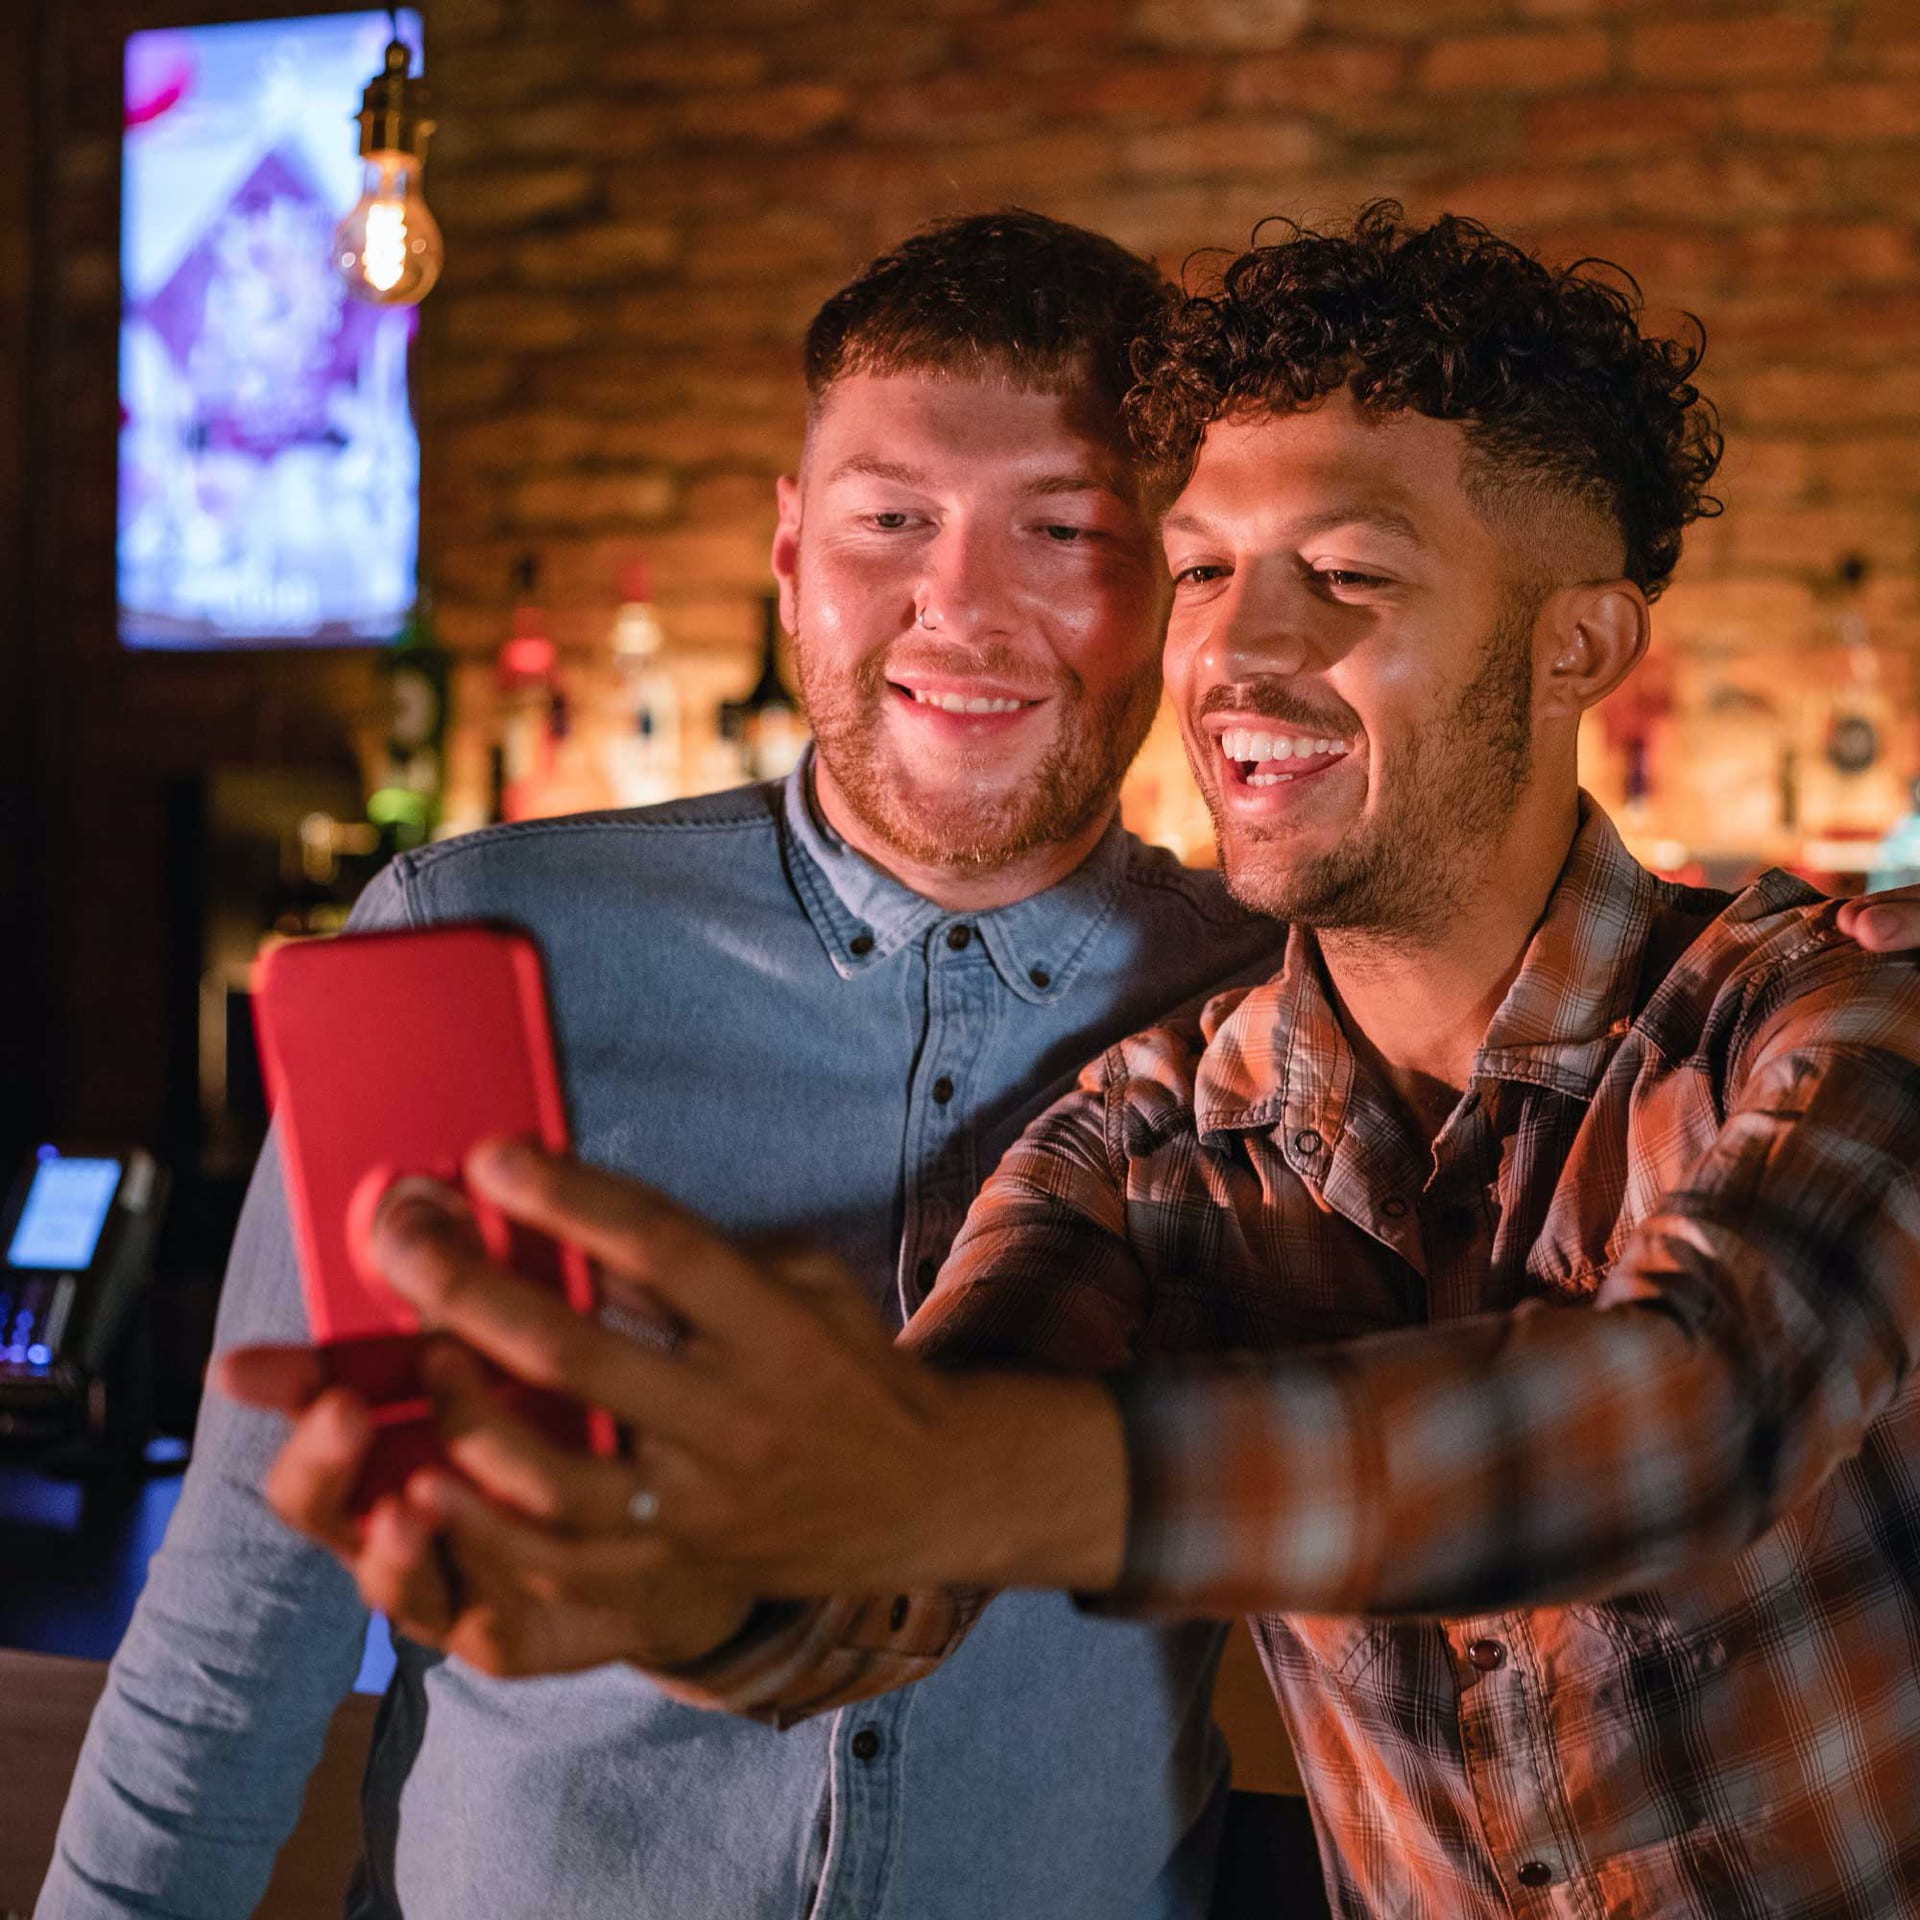 Gay couple taking a selfie in a bar.